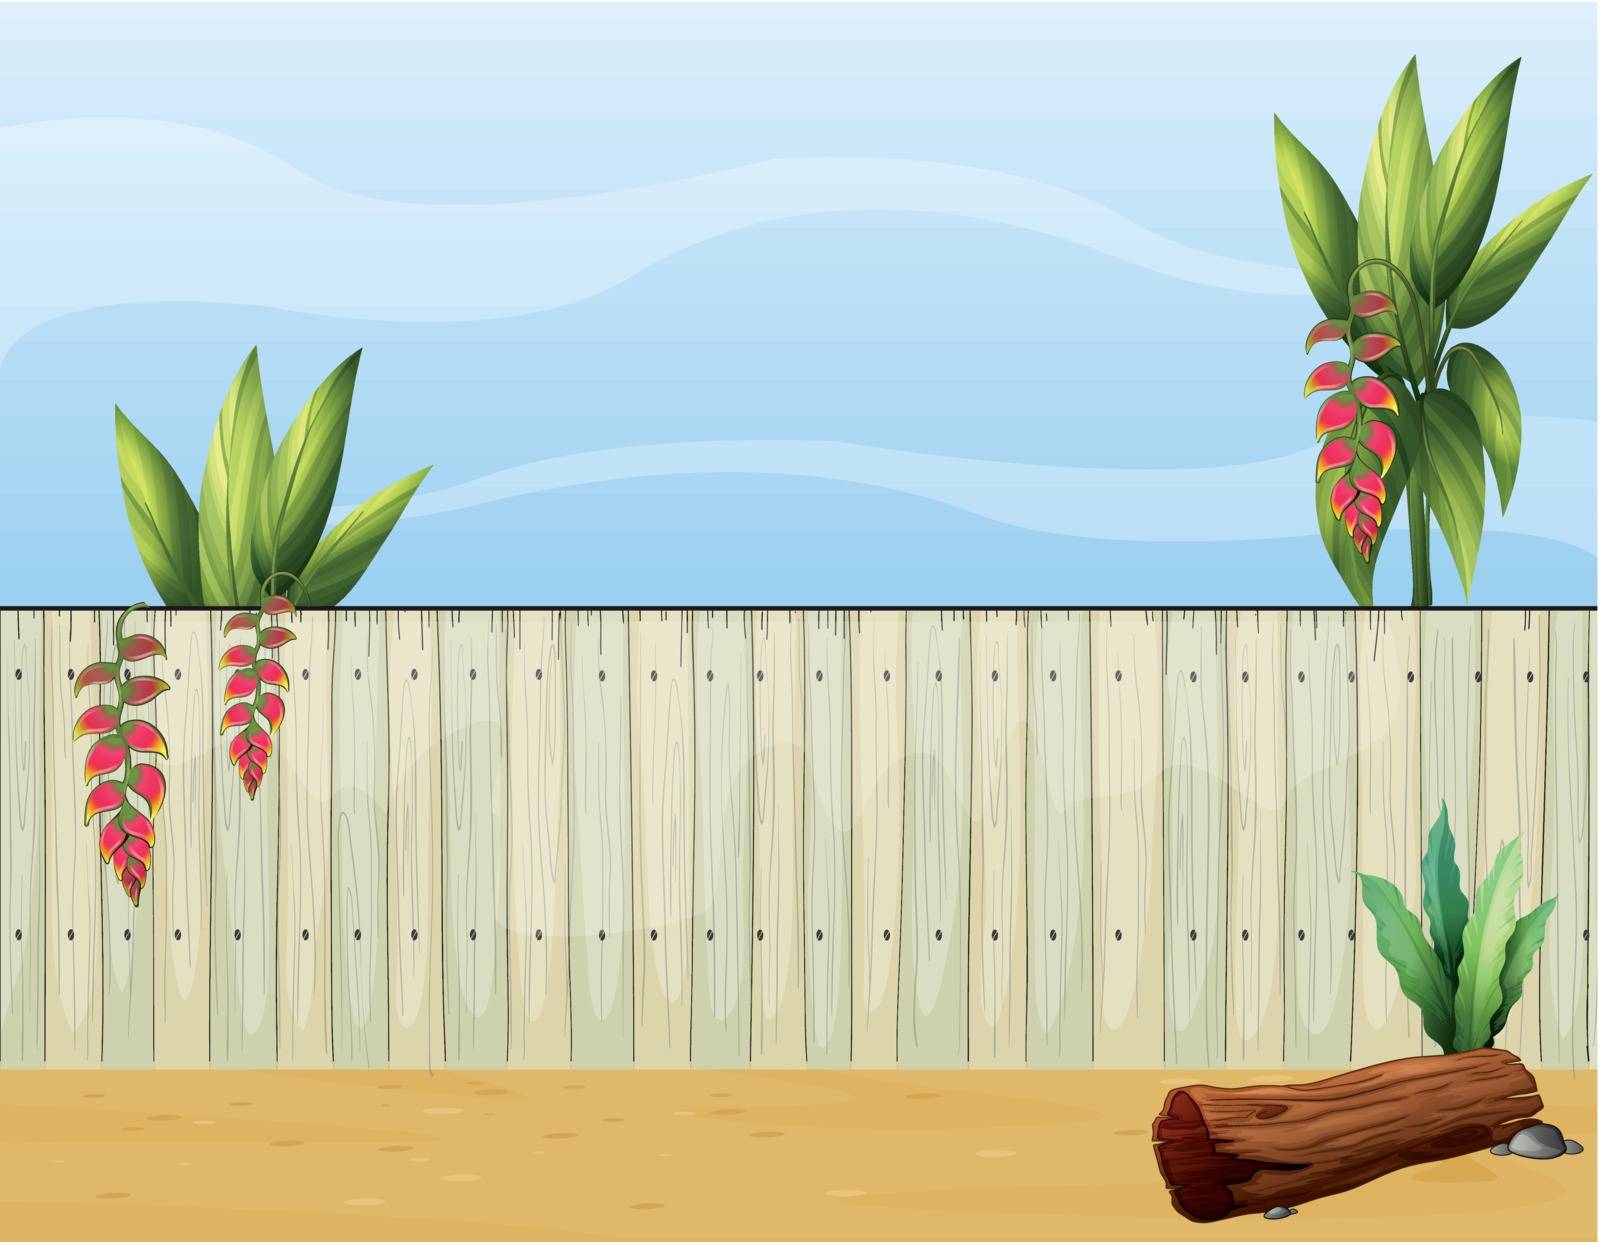 Illustration of a dry wood piece and a fence